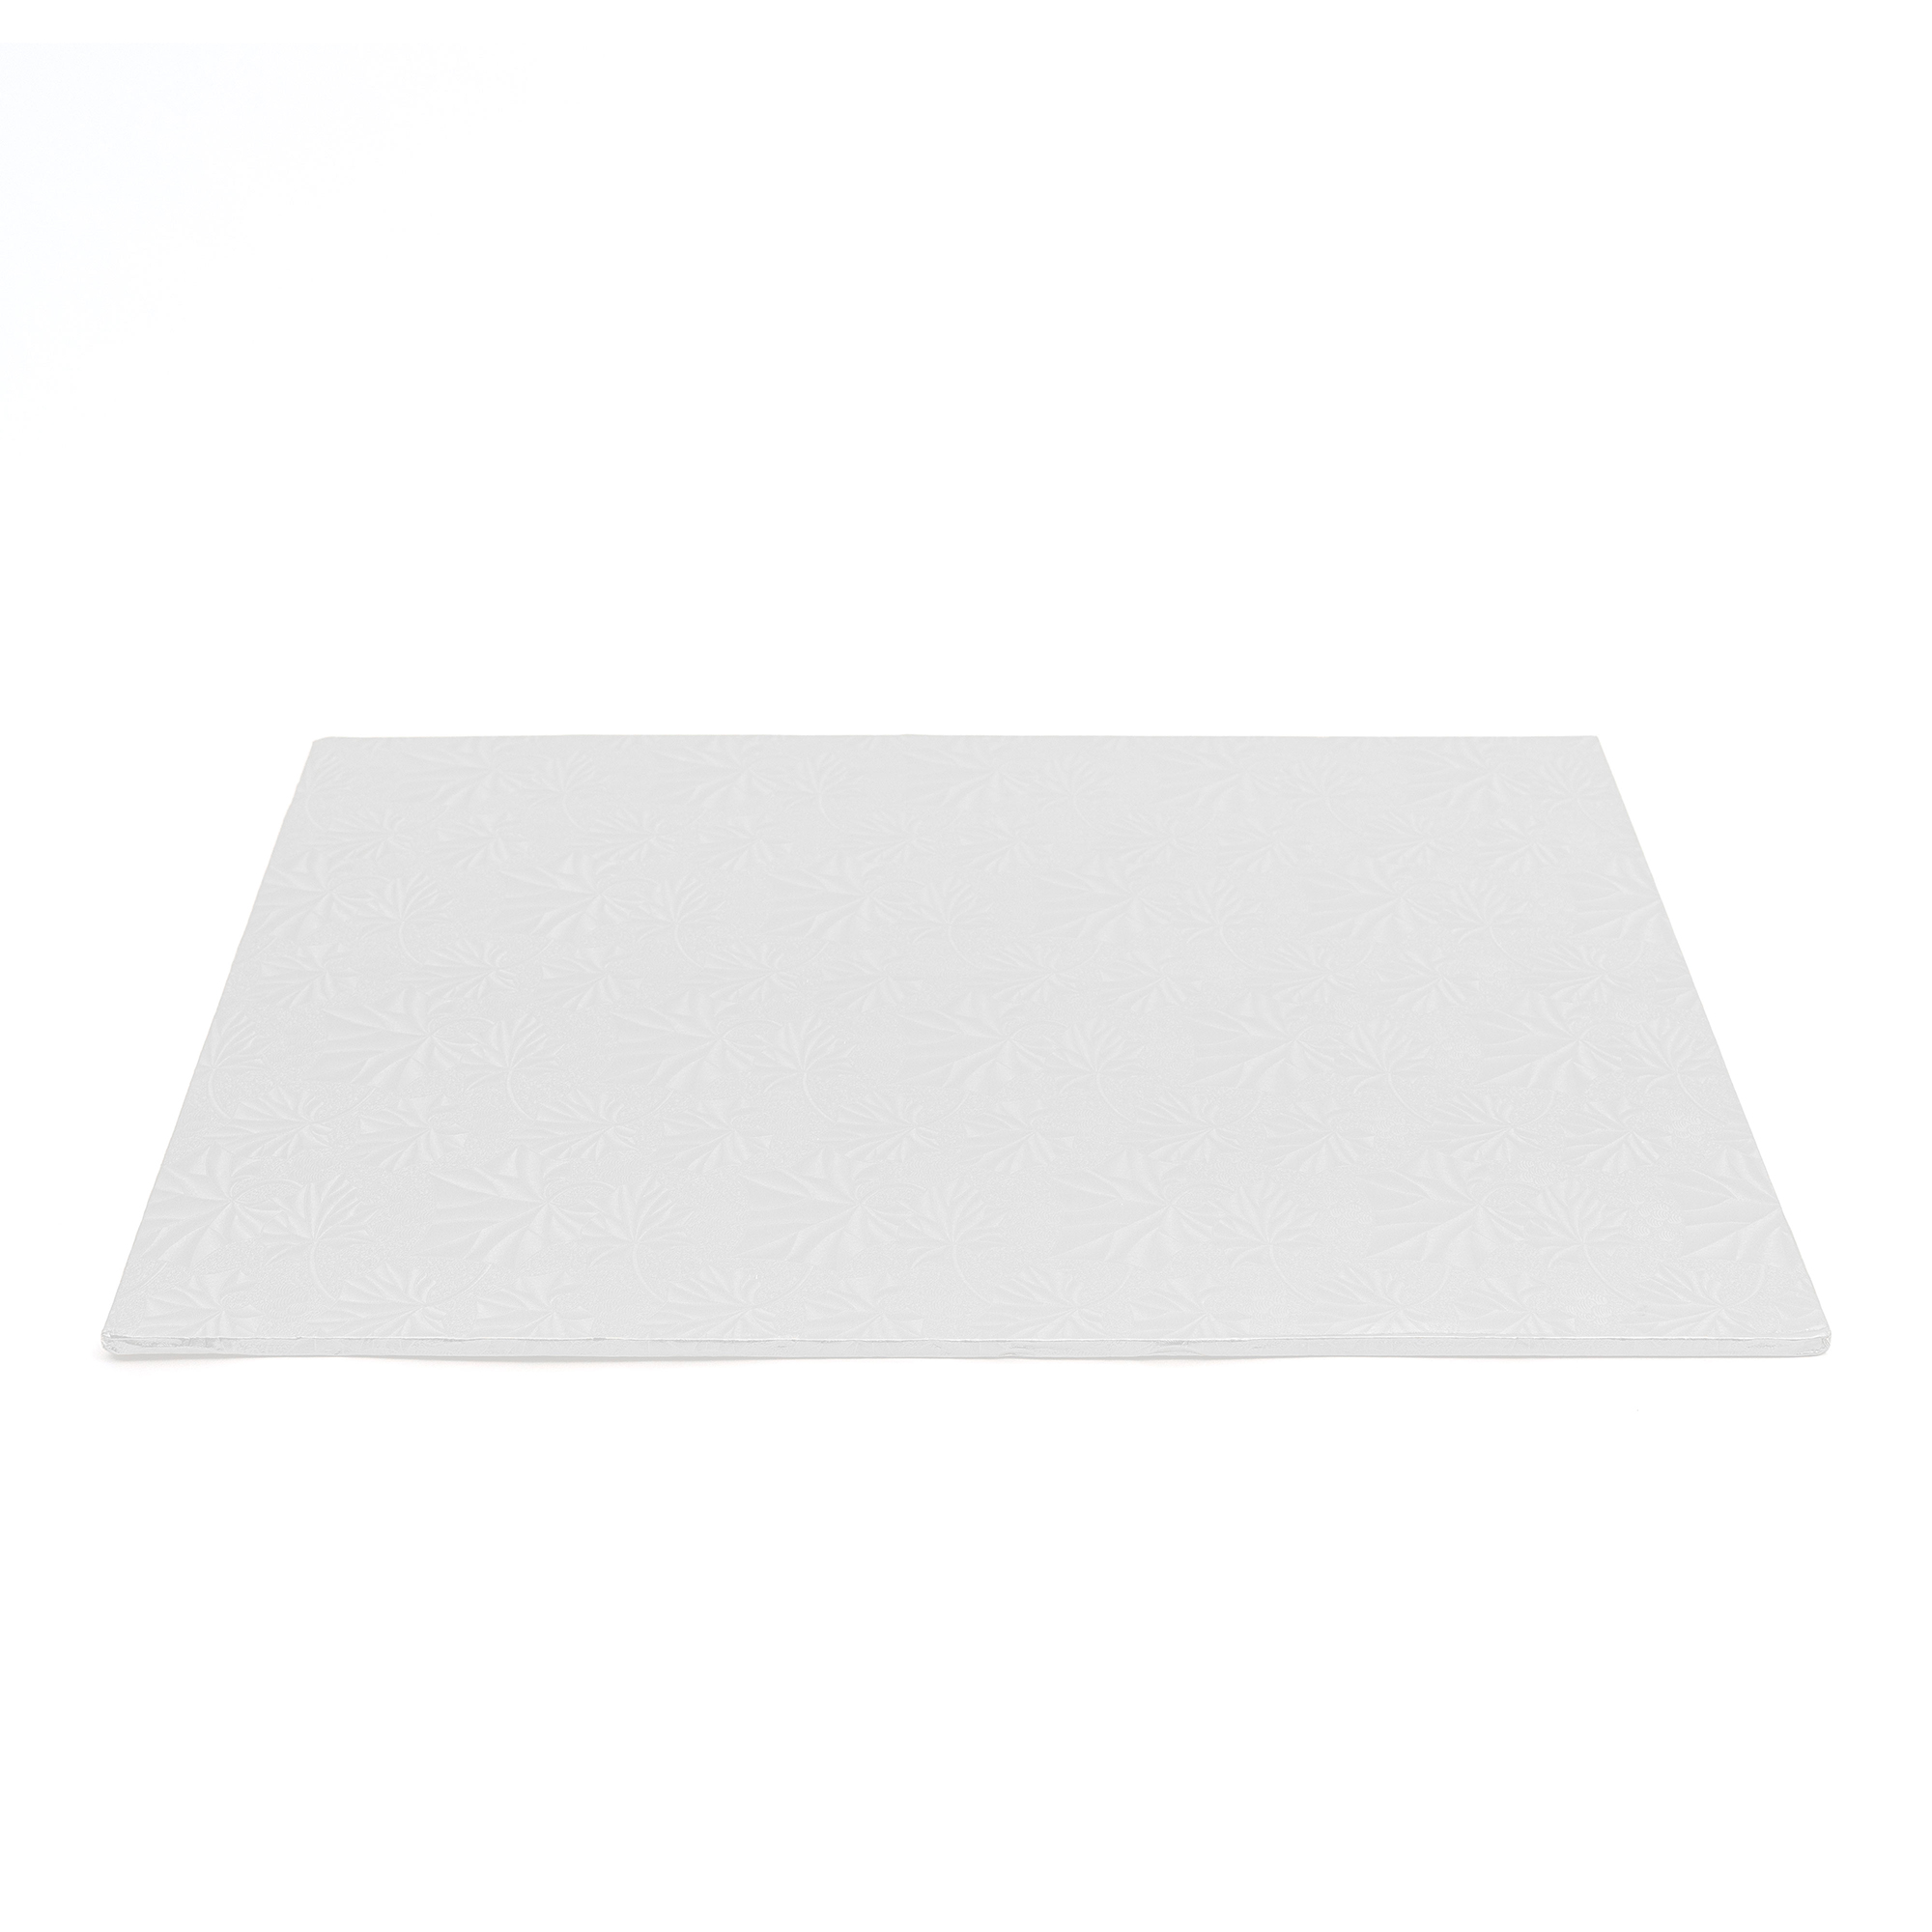 Foil Covered Cake Board ½sheet 5pc/pack - White